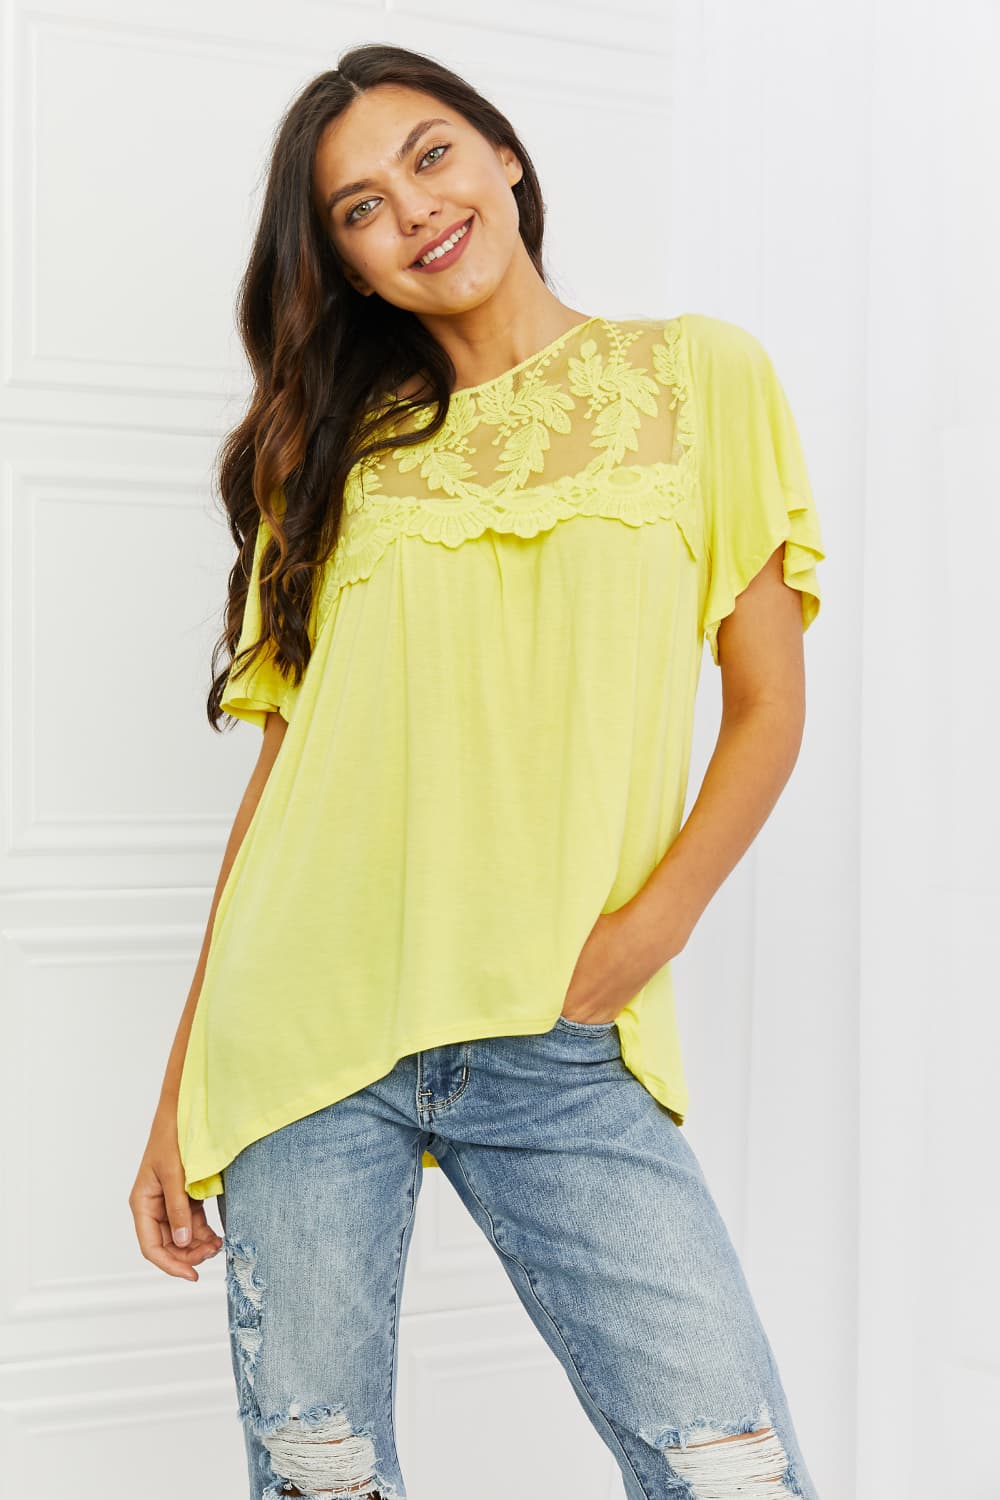 Culture Code Ready To Go Full Size Lace Embroidered Top in Yellow Mousse free shipping -Oh Em Gee Boutique